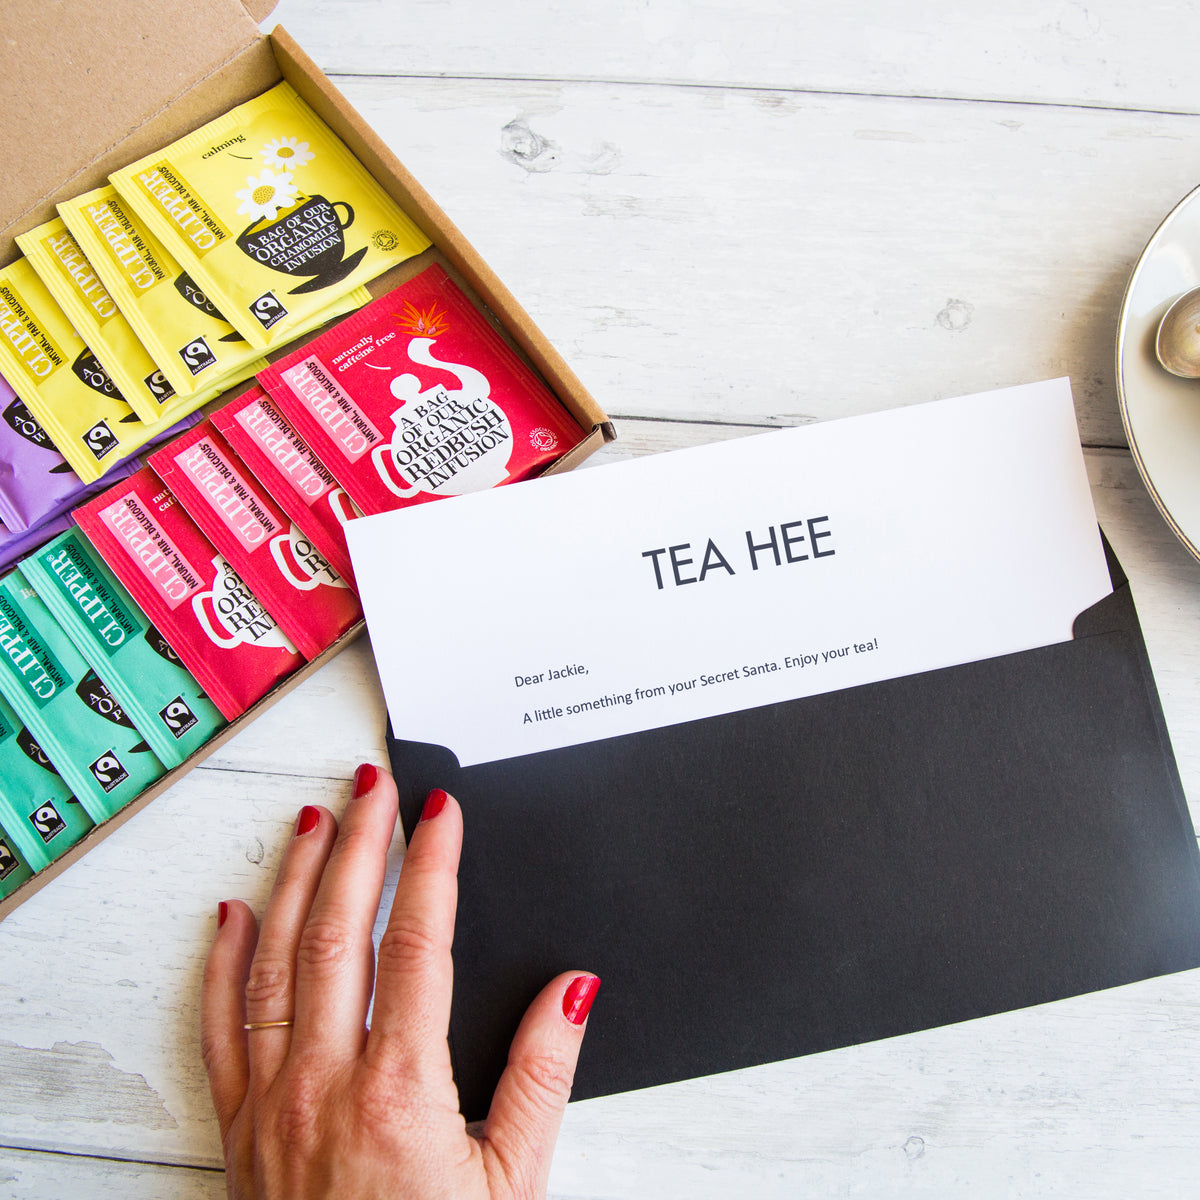 Corporate Tea Gift in Letterbox friendly packaging